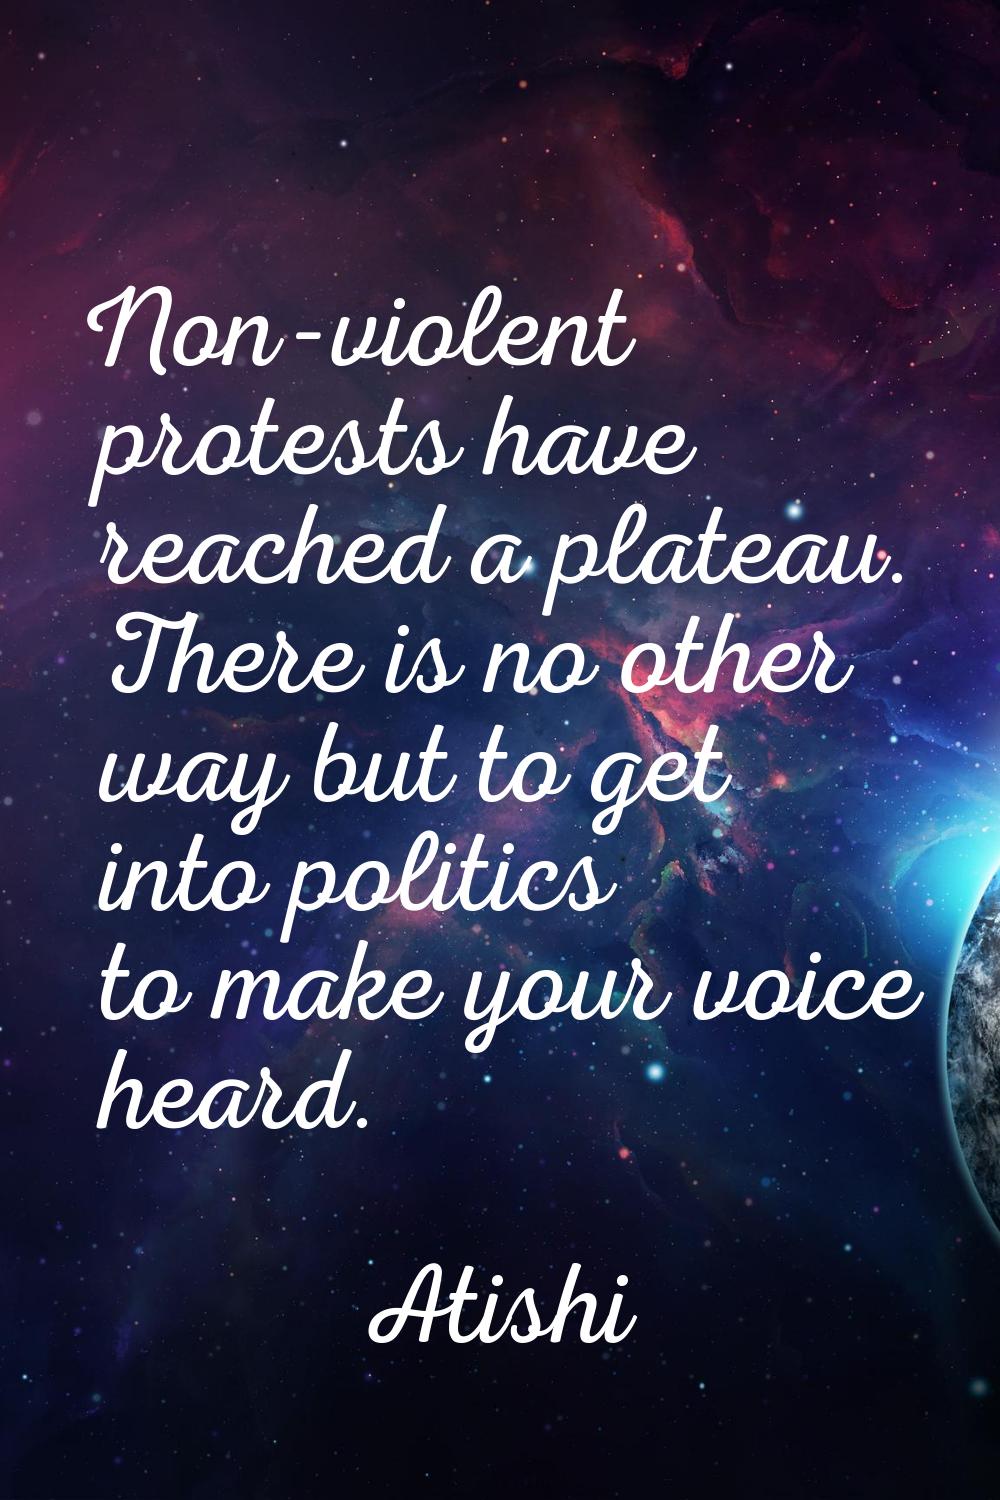 Non-violent protests have reached a plateau. There is no other way but to get into politics to make